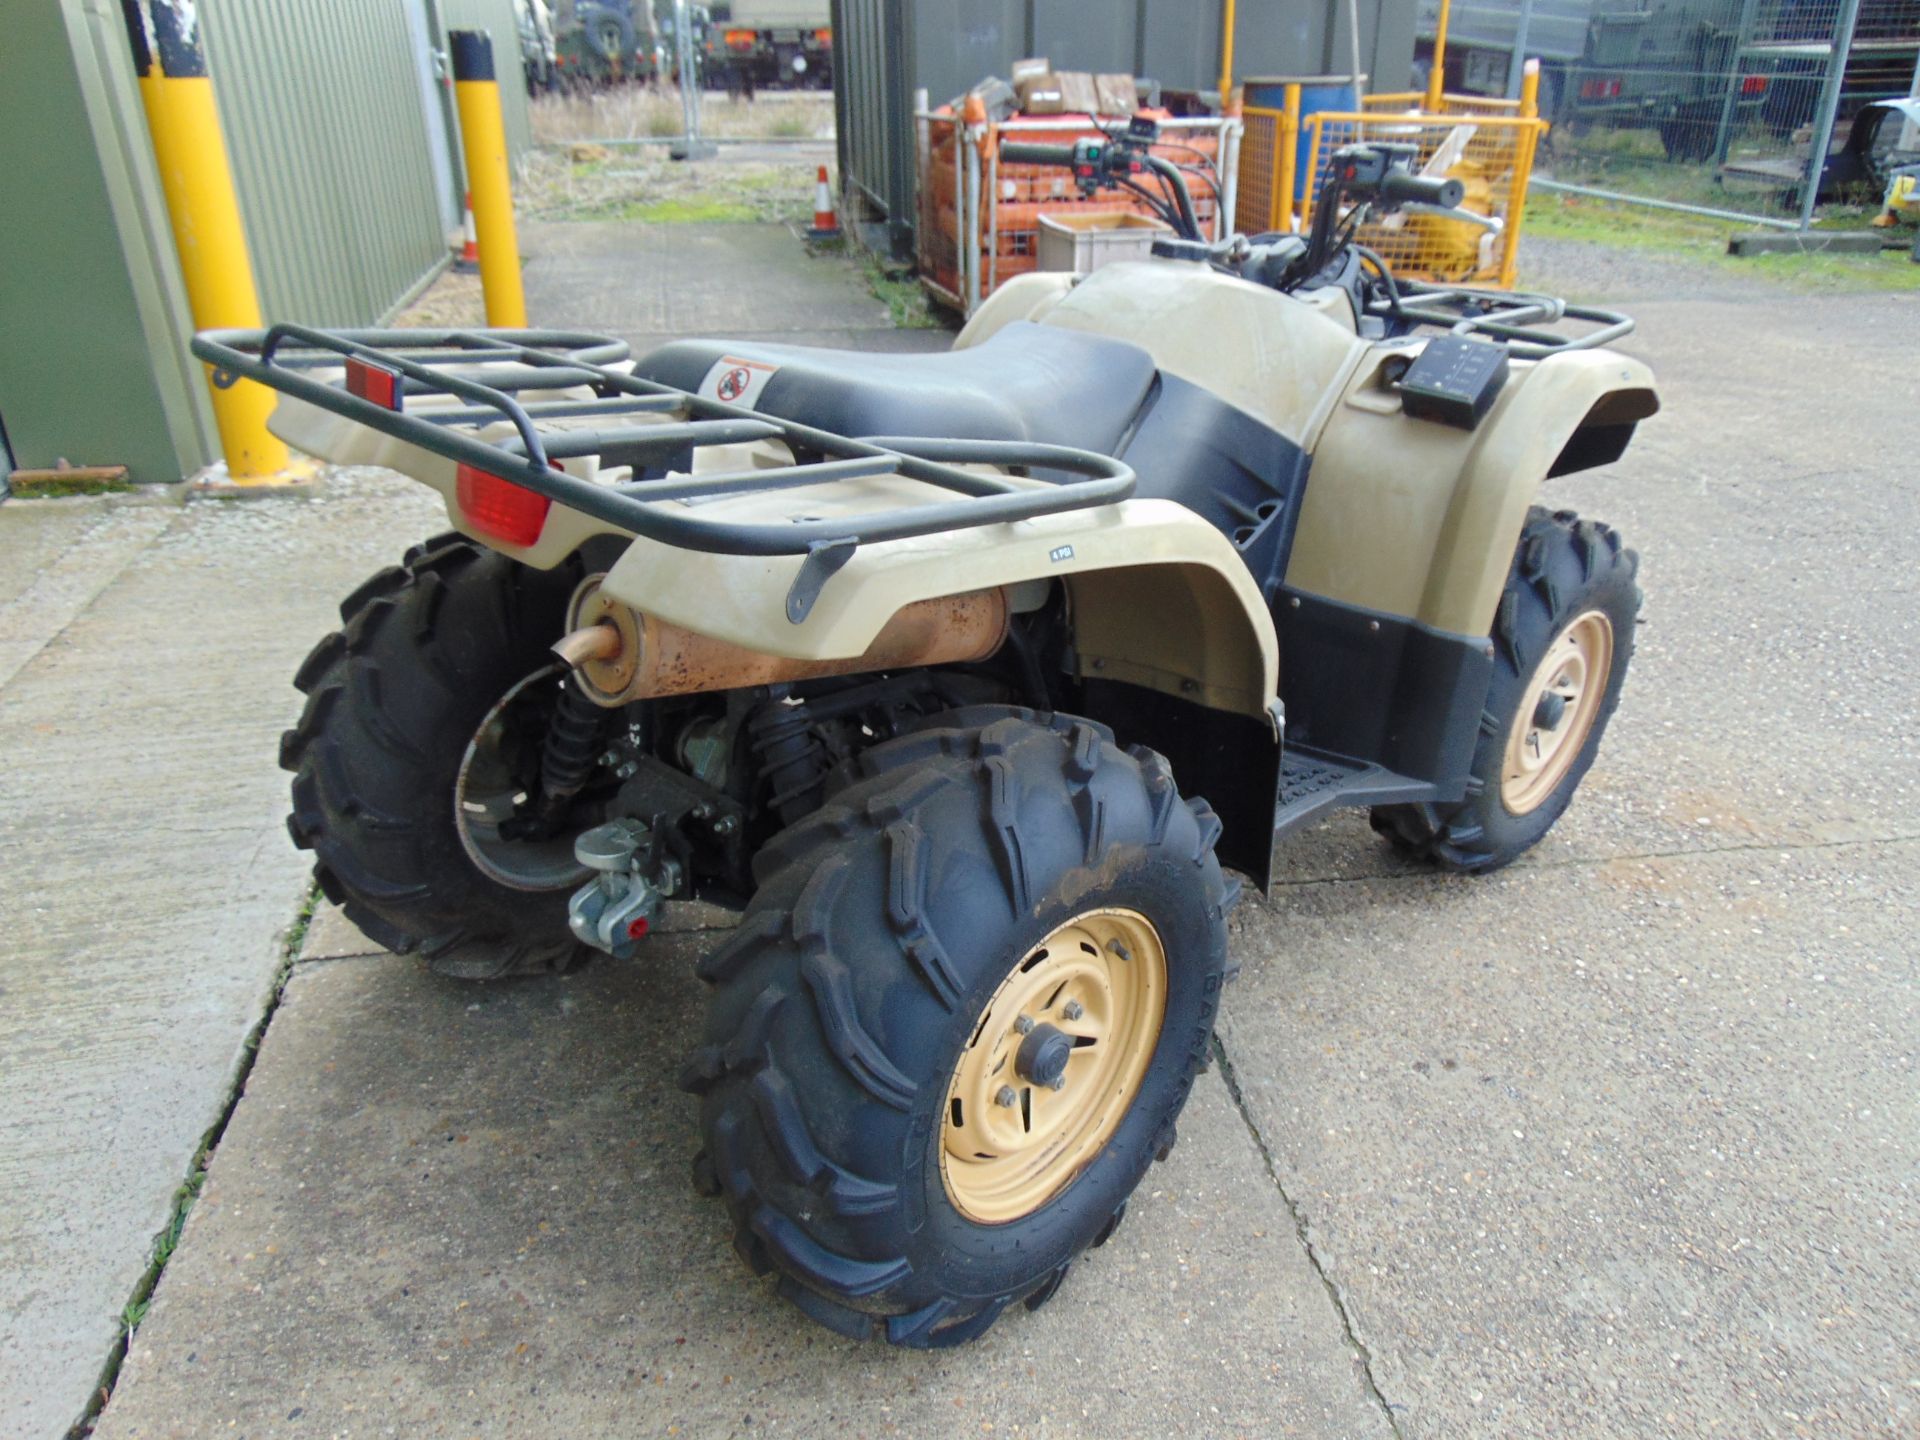 Military Specification Yamaha Grizzly 450 4 x 4 ATV Quad Bike Complete with Winch ONLY 591 HOURS! - Image 6 of 16